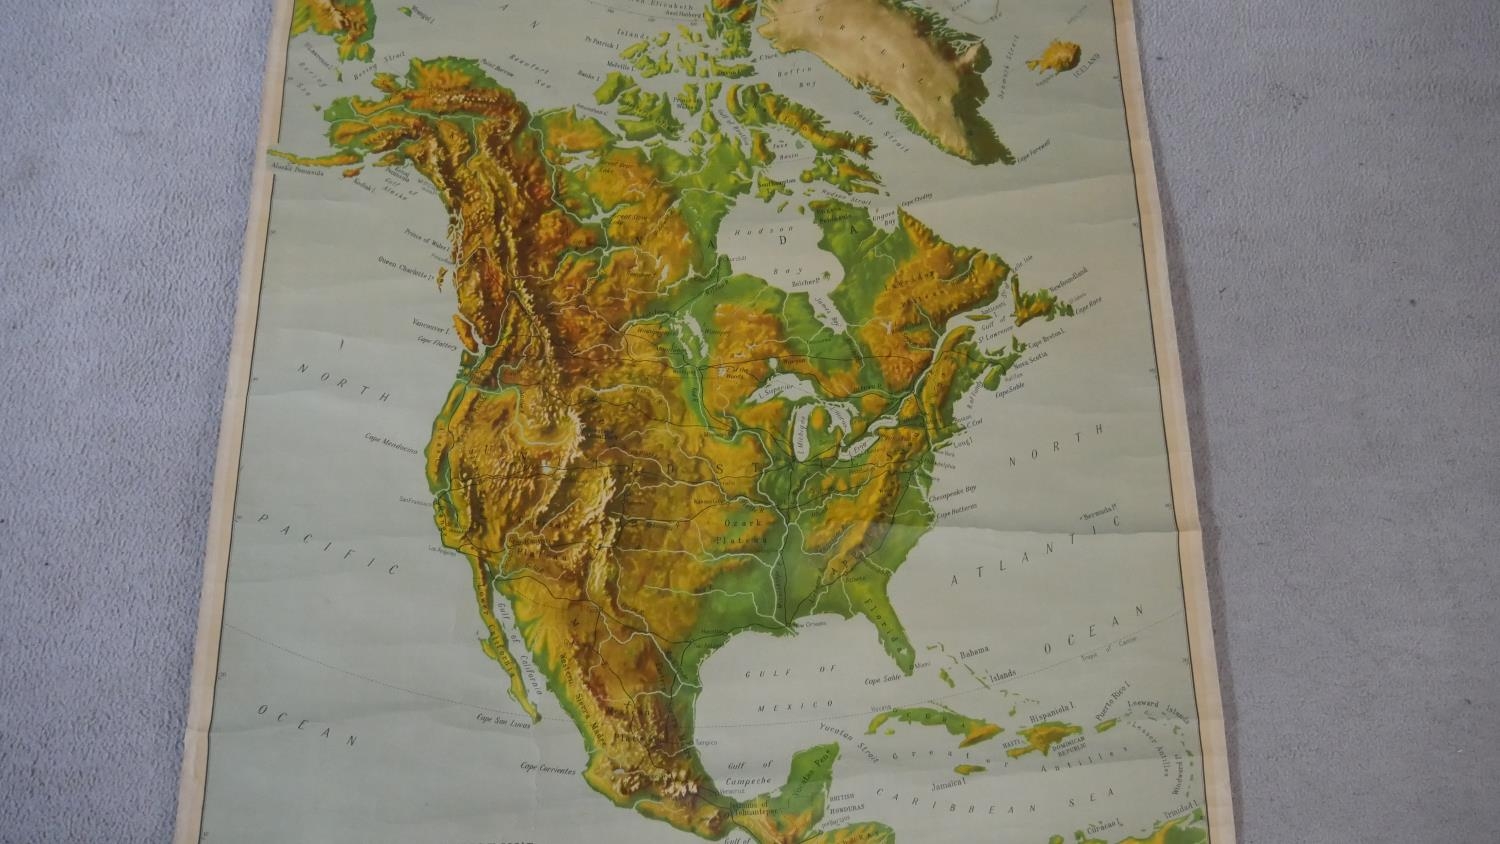 A Large University Chart ?Visual relief Map of North America? by W.A.K Johnston and G.W. Bacon, - Image 2 of 6